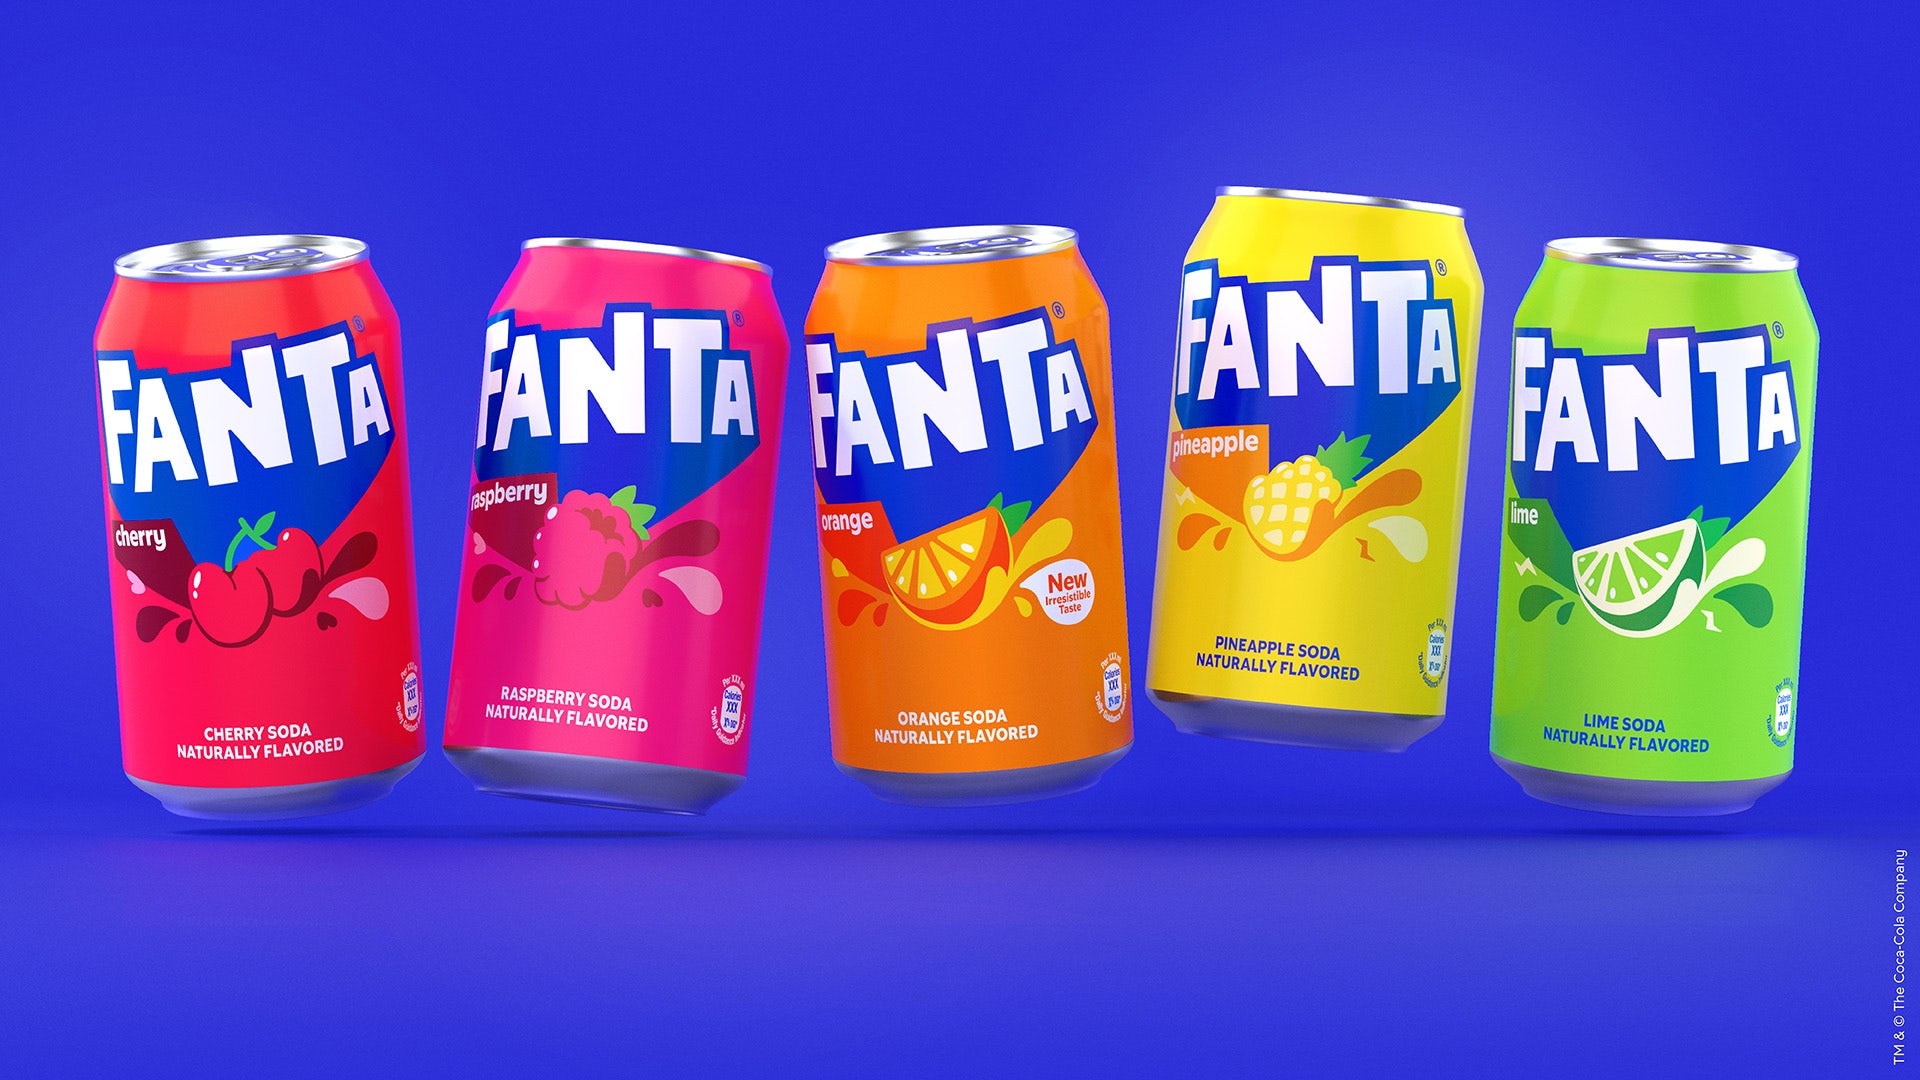 Image shows five cans of Fanta hovering over a bright blue background